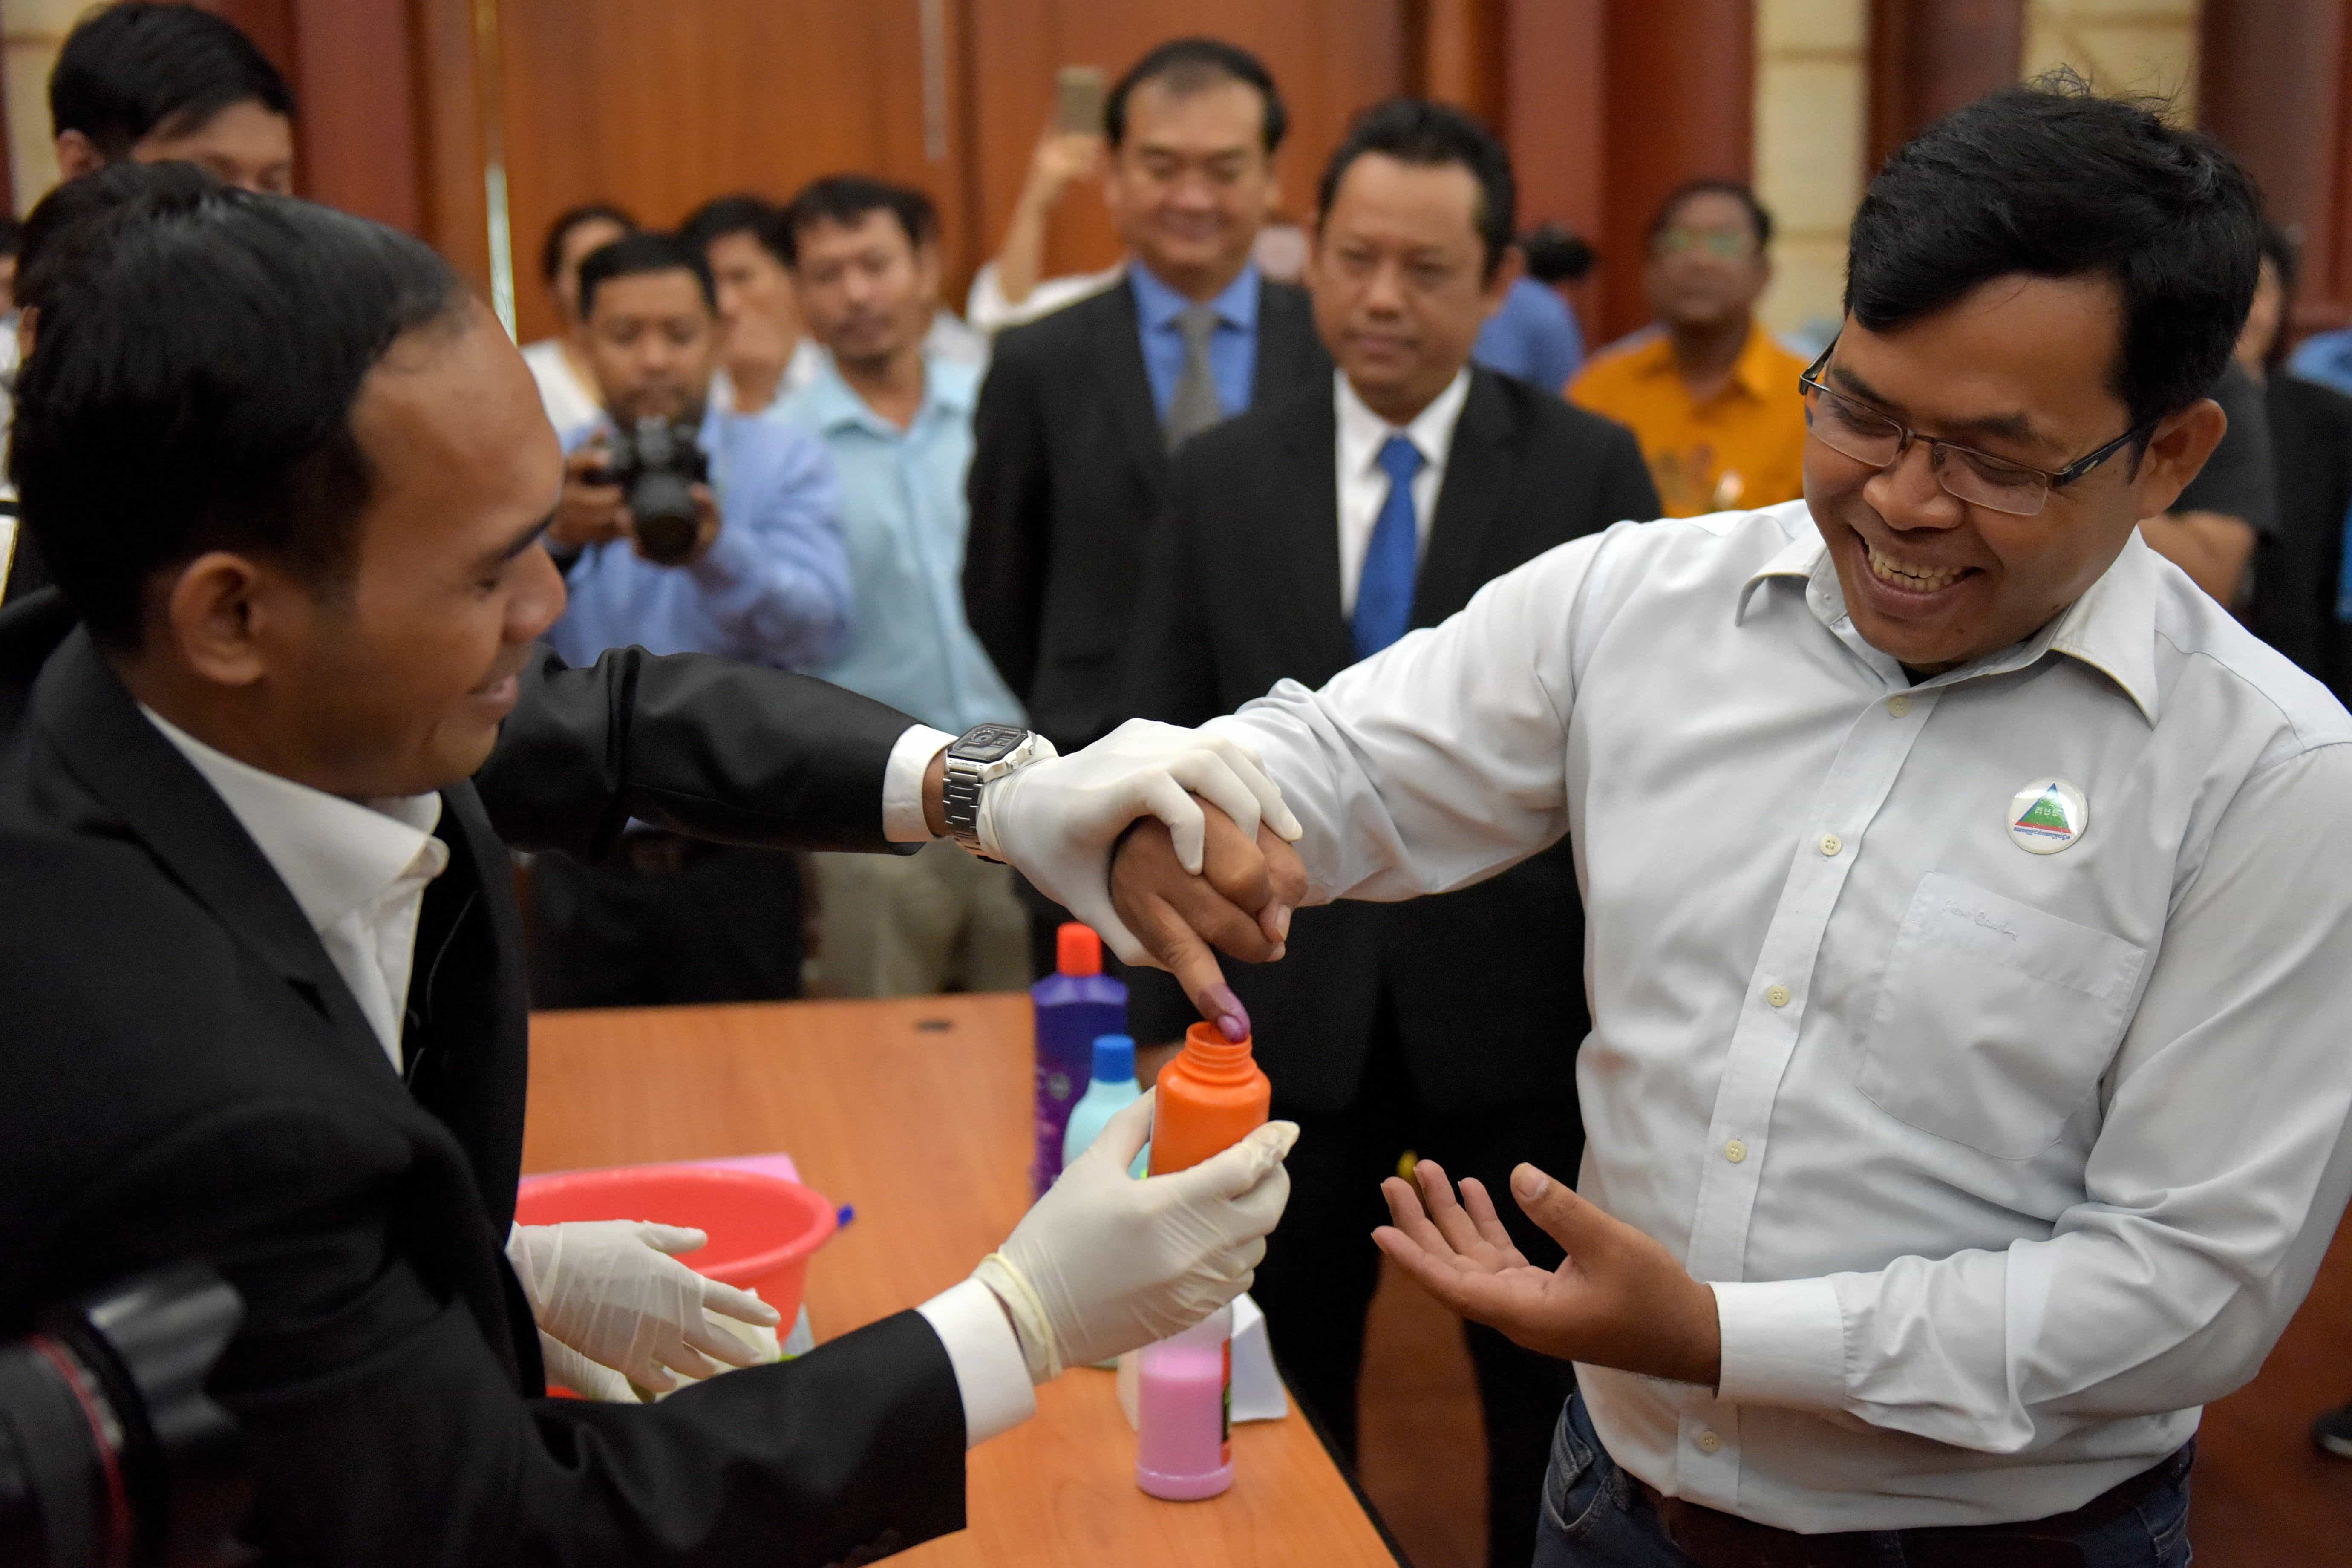 Cambodia's National Election Committee official uses a bottle of indelible ink to mark a finger during a briefing on the voting process in Phnom Penh on July 17, 2018, TANG CHHIN SOTHY/AFP/Getty Images